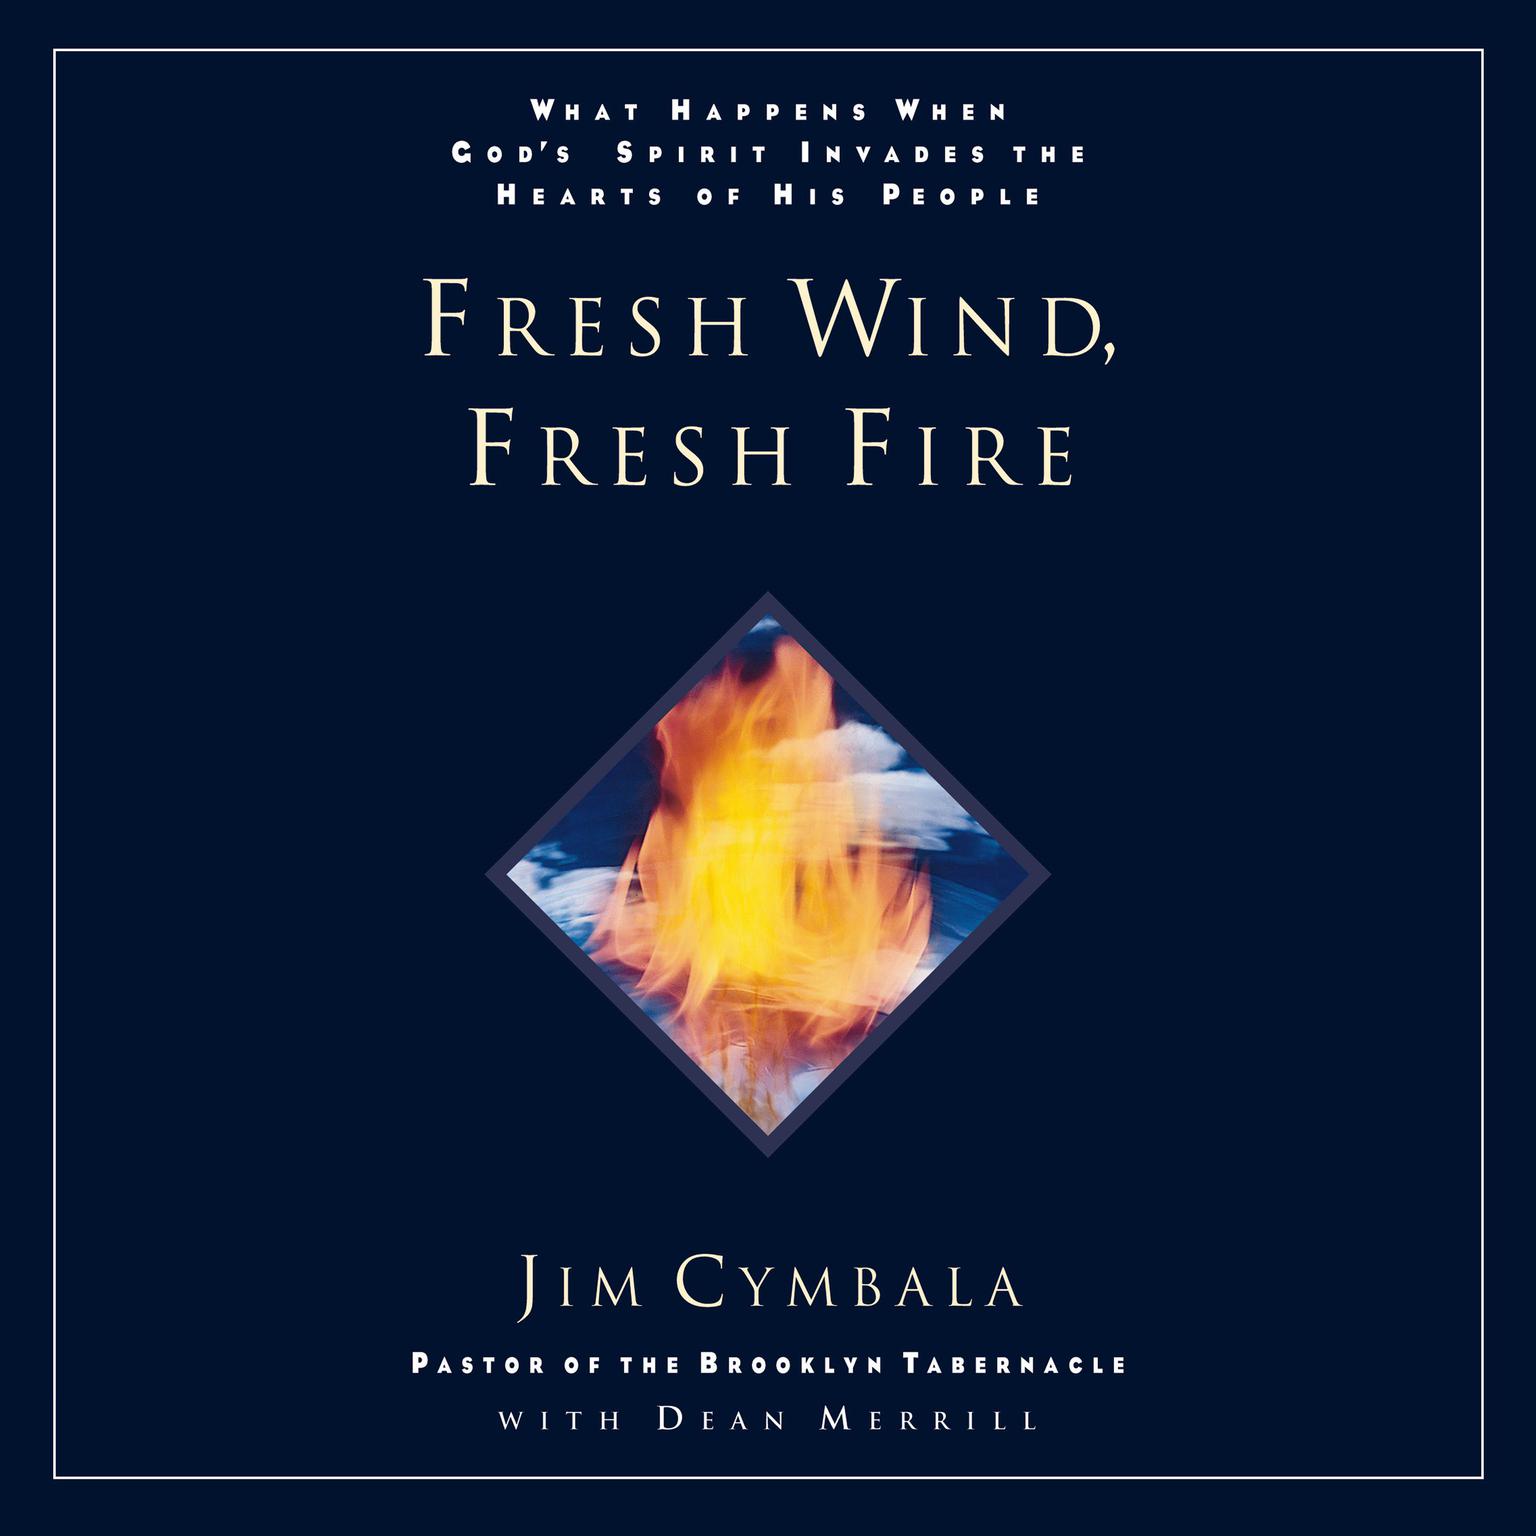 Fresh Wind, Fresh Fire (Abridged): What Happens When Gods Spirit Invades the Heart of His People Audiobook, by Jim Cymbala